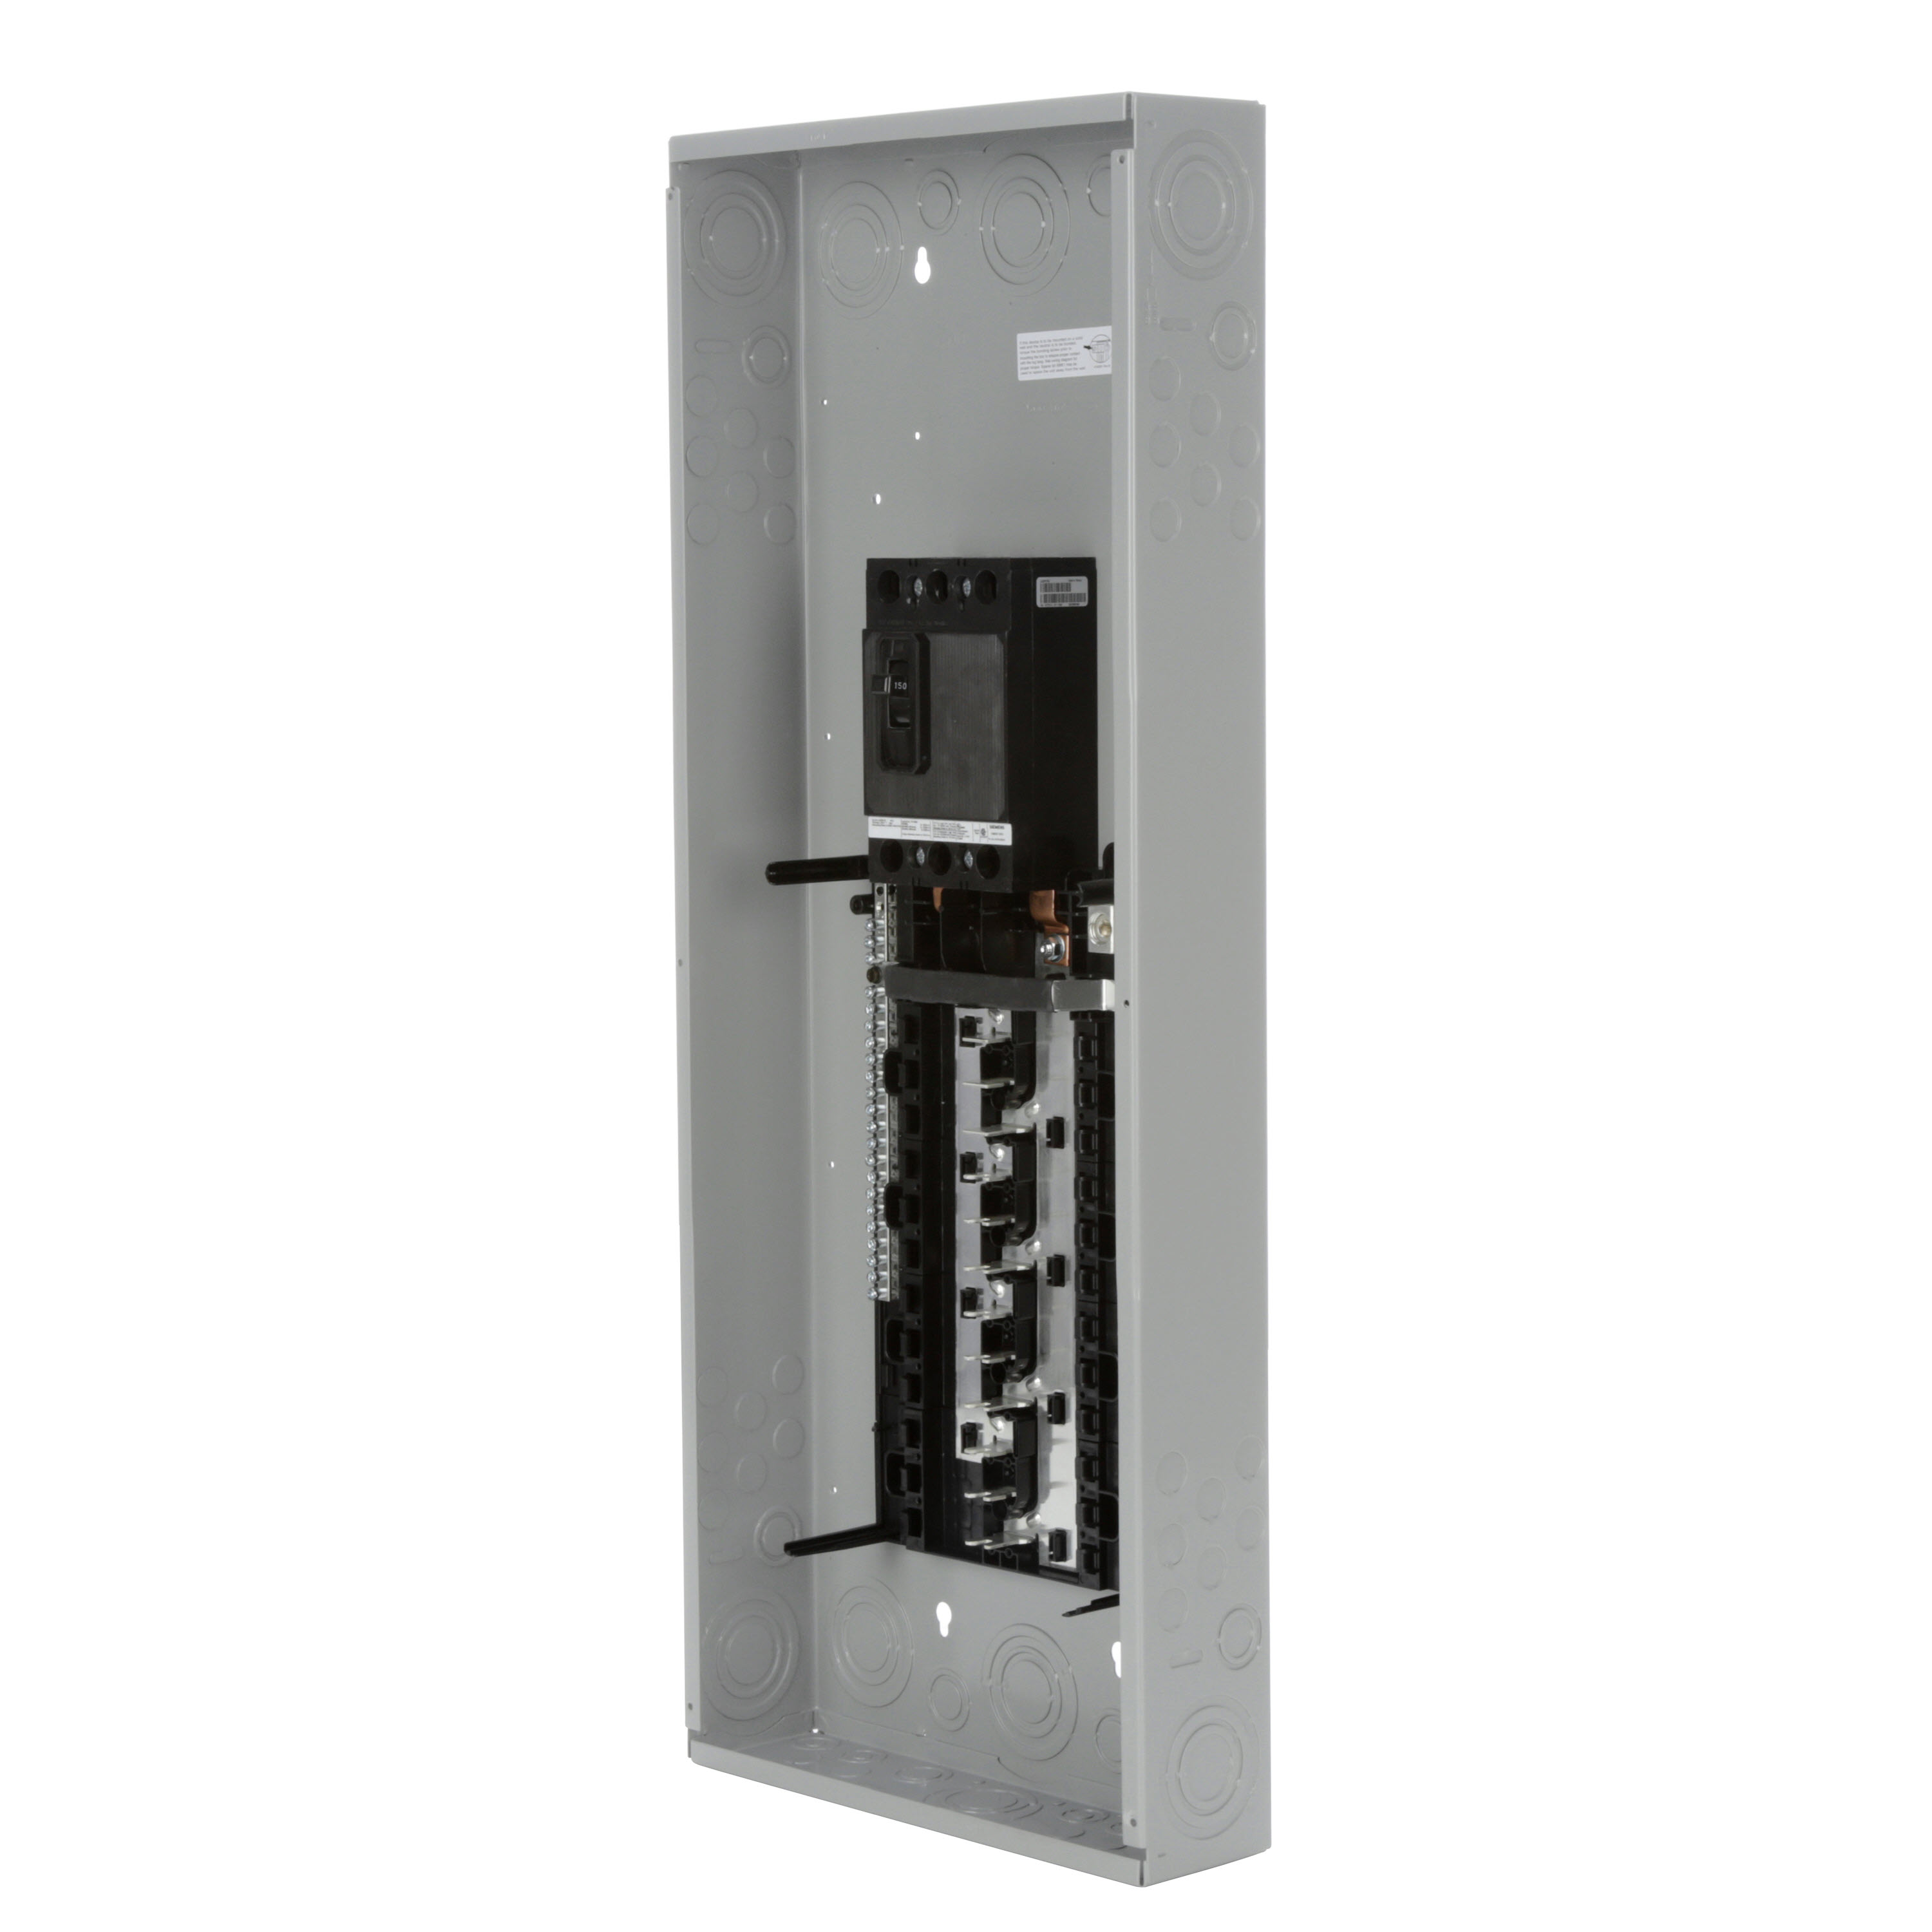 SIEMENS LOW VOLTAGE ES SERIES LOAD CENTER. FACTORY INSTALLED MAIN BREAKER WITH 24 1-INCH SPACES ALLOWING MAX 42 CIRCUITS. 3-PHASE 4-WIRE SYSTEM RATED 120/240V OR 120/208V (150A) 10KA INTERRUPT. SPECIAL FEATURES ALUMINUM BUS, GRAY TRIM, NEMA TYPE1 ENCLOSURE FOR INDOOR USE.